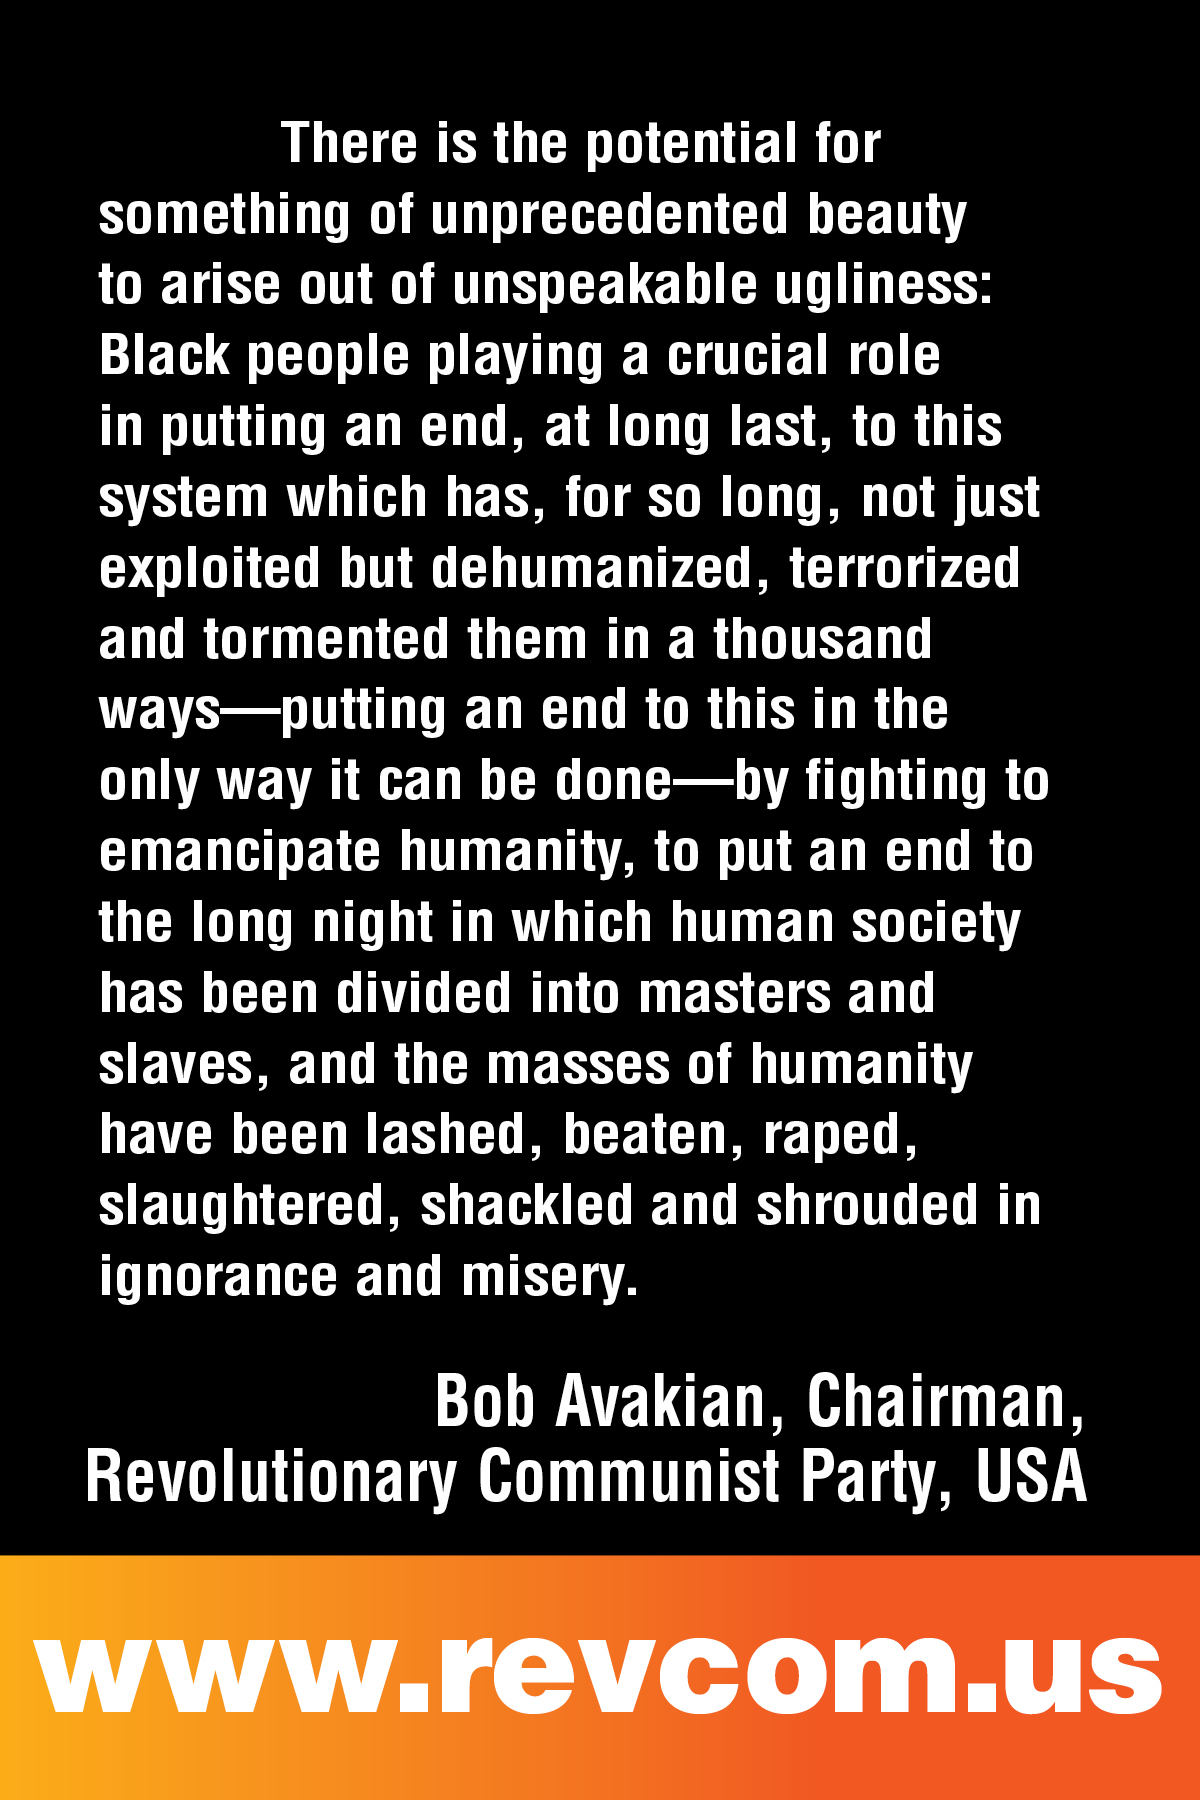 Bob Avakian quote - front